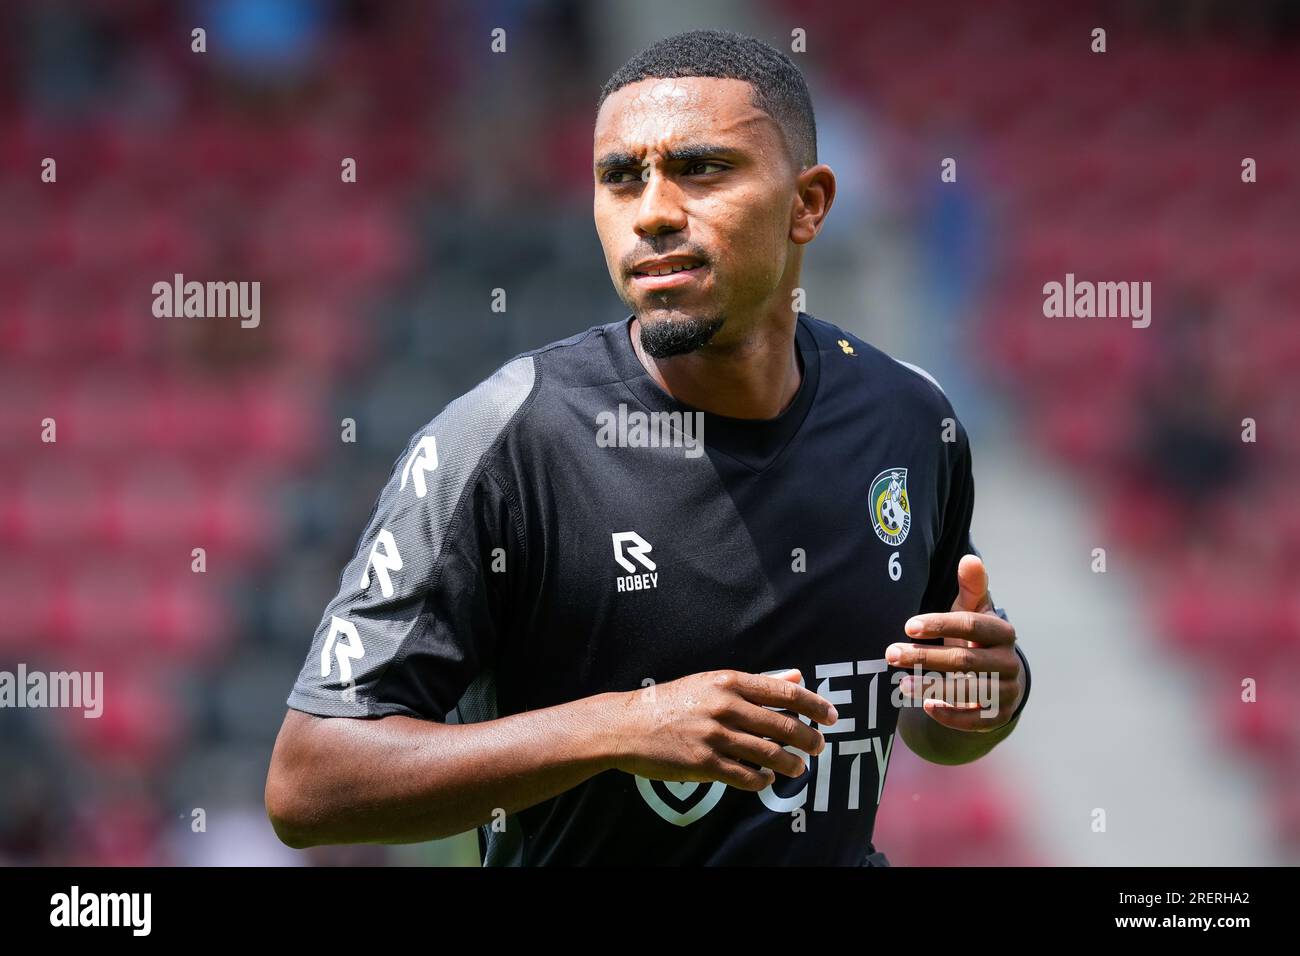 Taunusstein Wehen, Germany. 22nd July, 2023. TAUNUSSTEIN-WEHEN, GERMANY - JULY 22: Deroy Duarte of Fortuna Sittard during the Pre-Season Friendly match between SV Wehen Wiesbaden and Fortuna Sittard at the BRITA-Arena on July 22, 2023 in Taunusstein-Wehen, Germany (Photo by Orange Pictures) Credit: Orange Pics BV/Alamy Live News Stock Photo